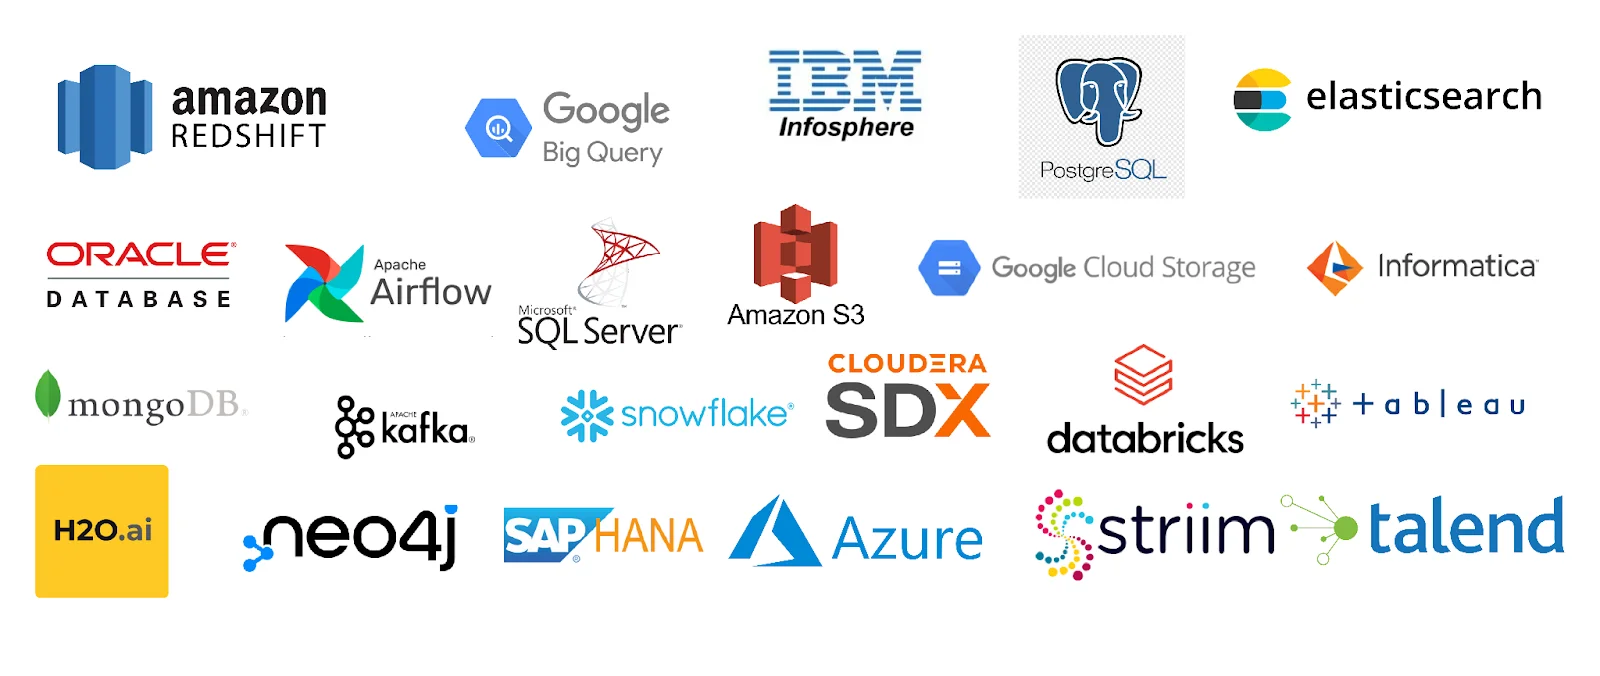 Image of various technologies that might be involved in a data science workflow